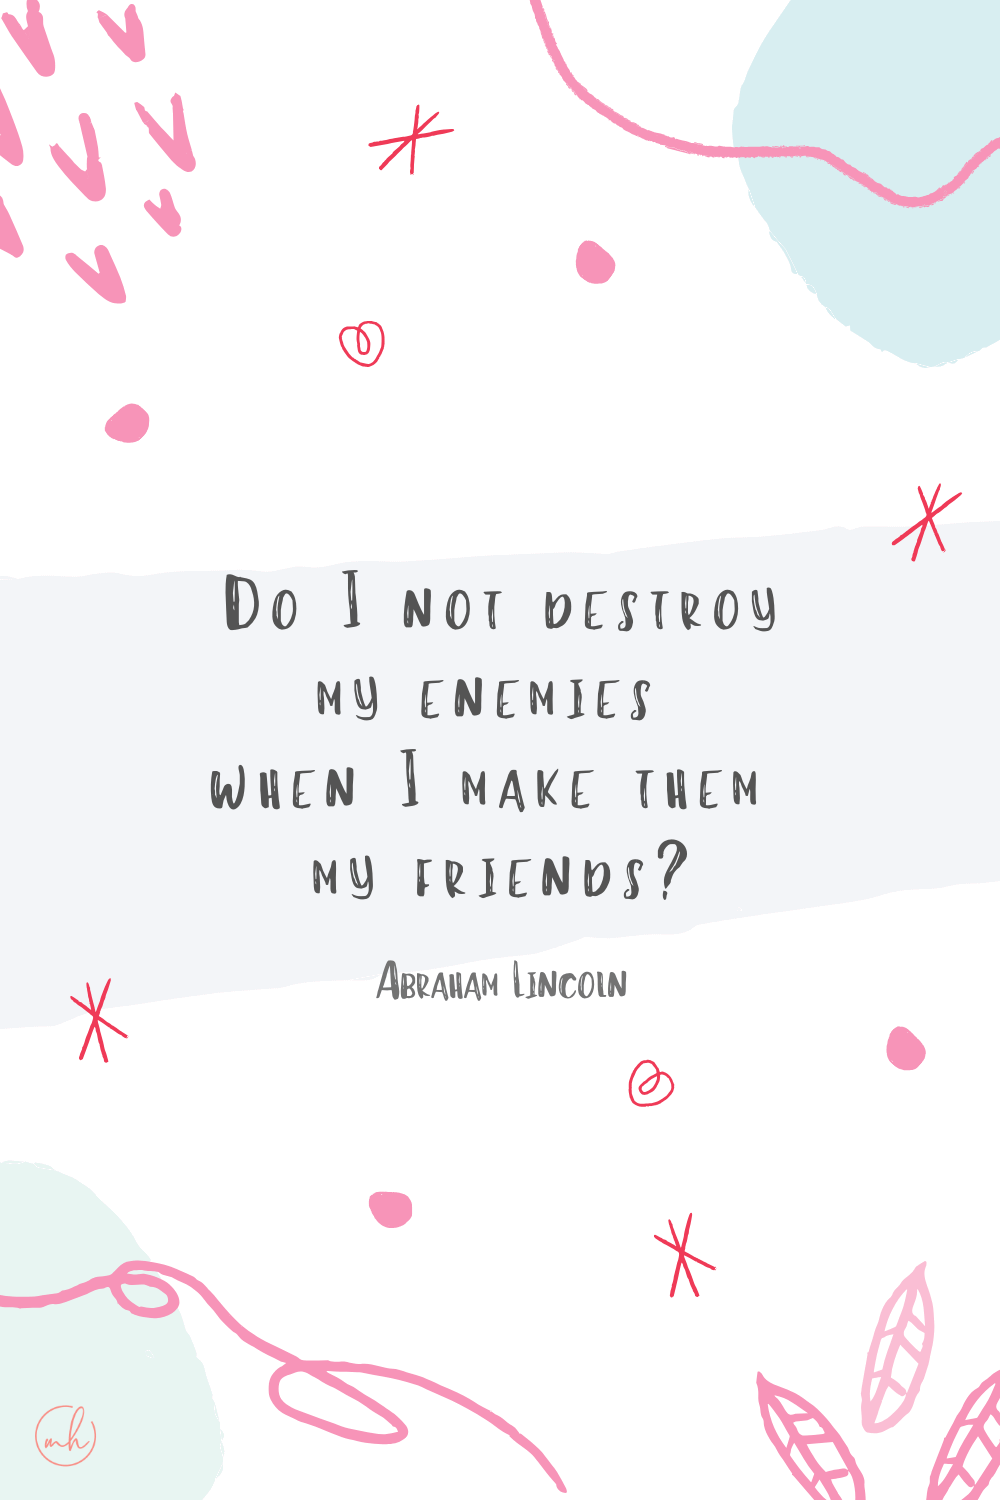 “Do I not destroy my enemies when I make them my friends?” - Abraham Lincoln